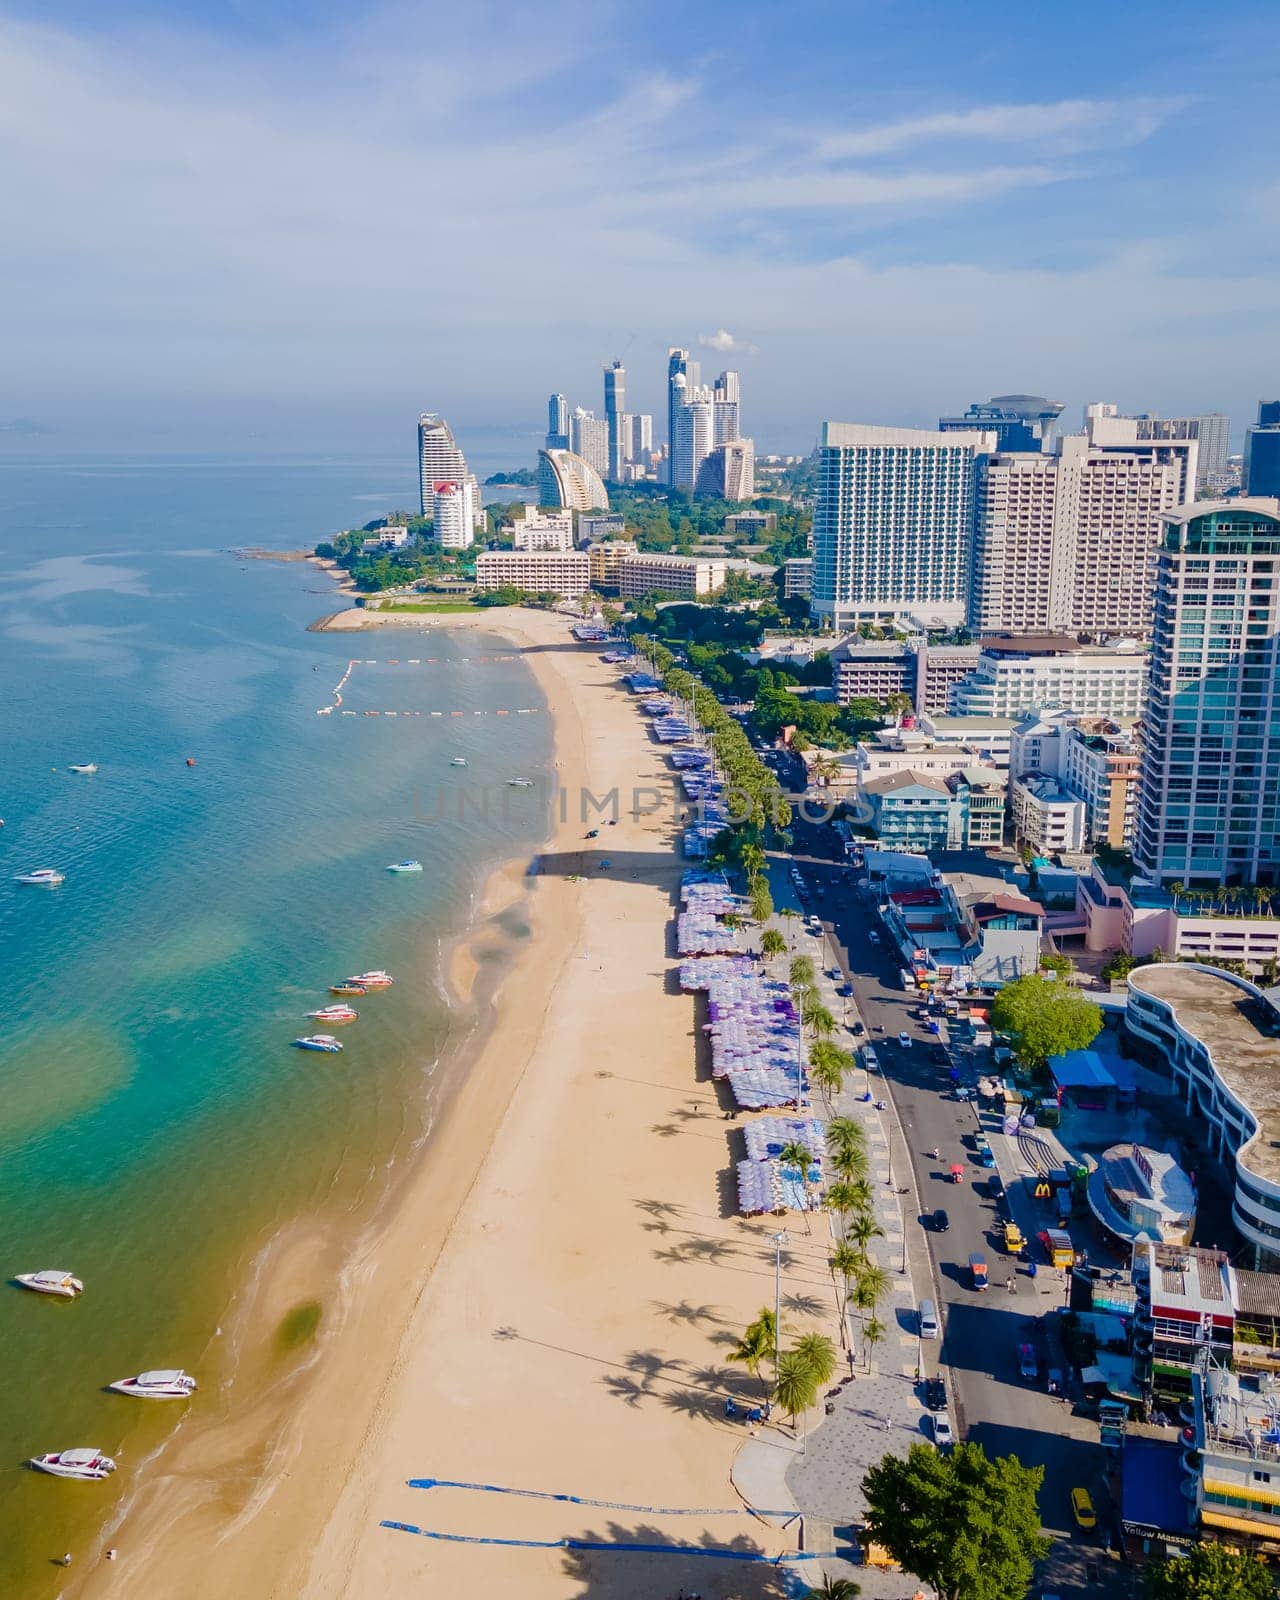 Pattaya Thailand, a view of the beach road with hotels and skyscrapers buildings alongside the renovated new beach road. Drone aerial view of the beach of Pattaya